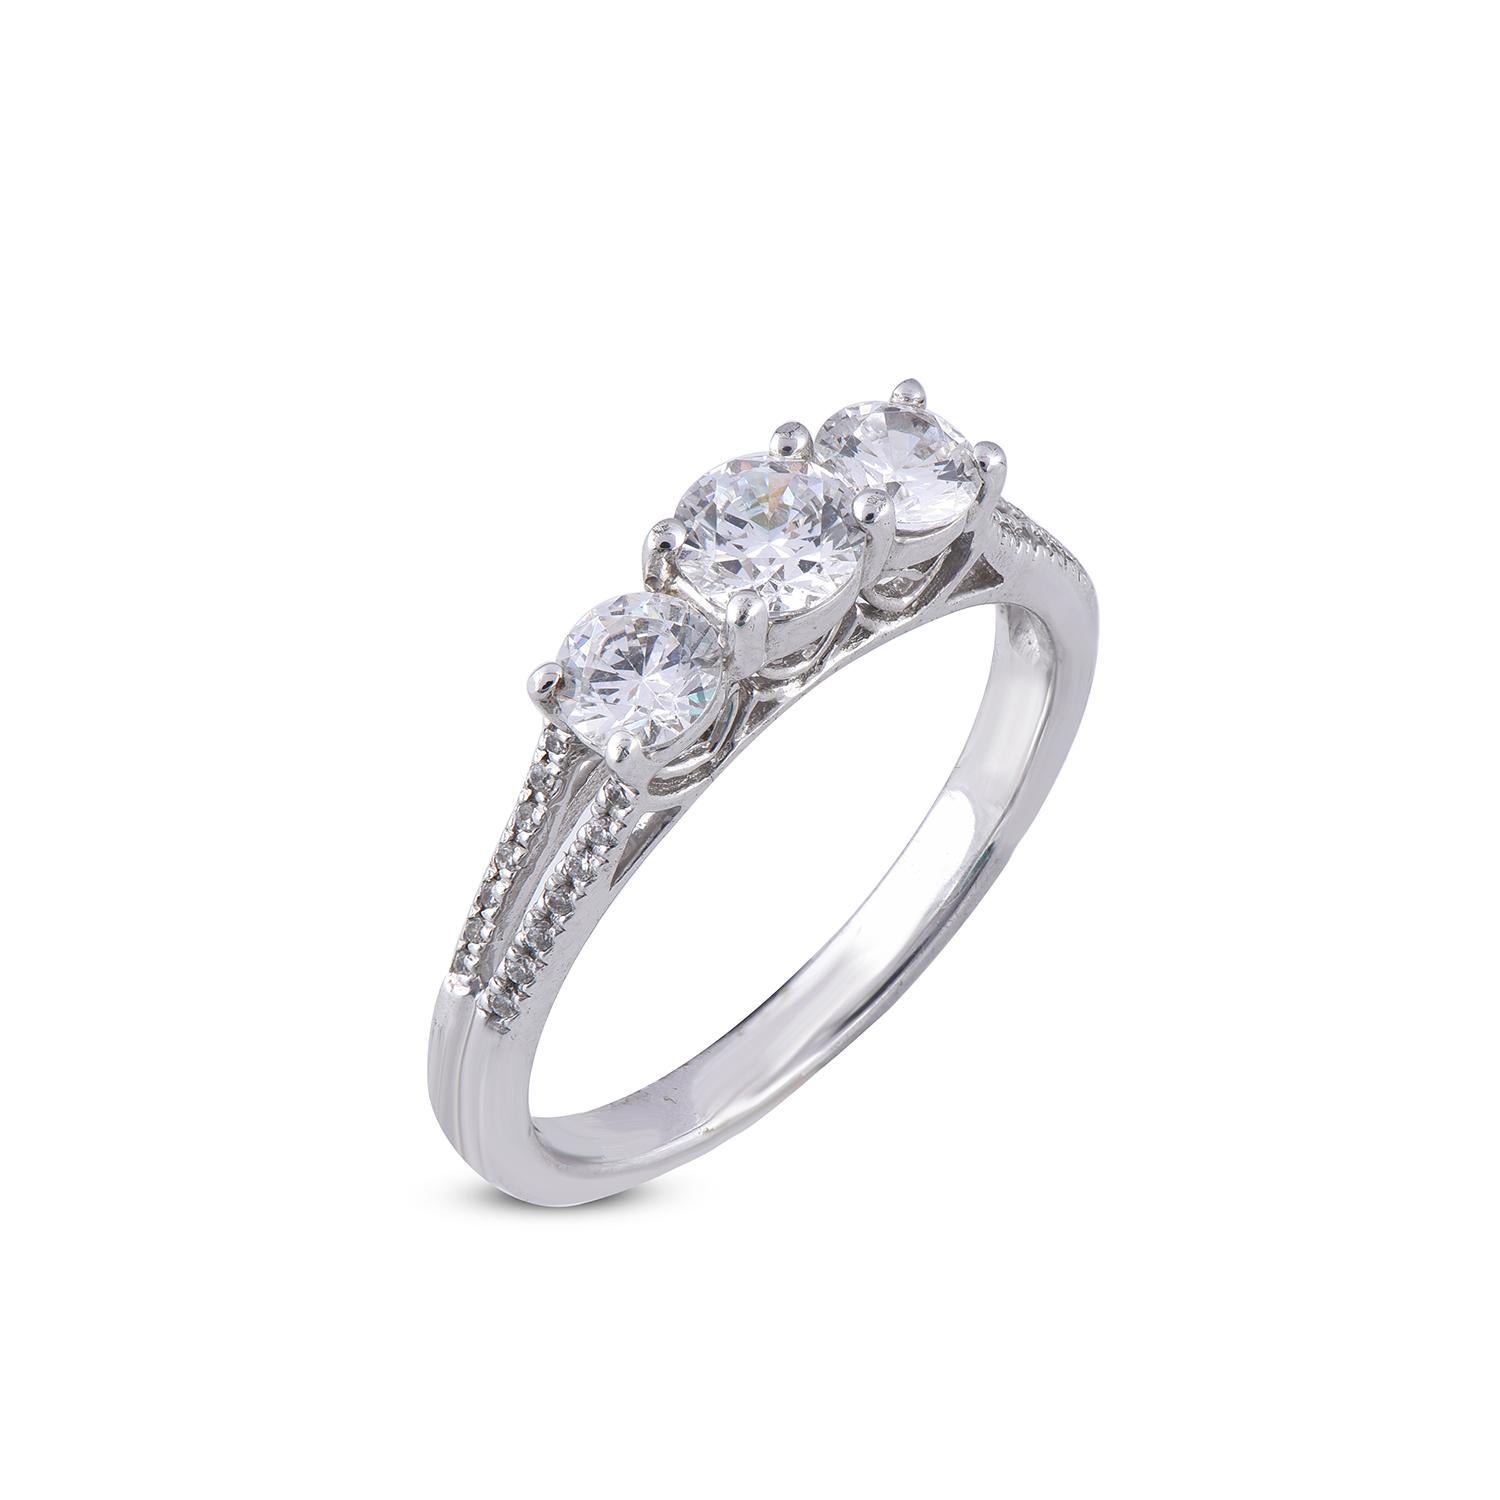 This dazzling design features with 0.40ct of center stone and 0.245 ct 2 diamonds set in prong setting remaining 28 diamonds crafted by our skillful artisans in 18 karat white gold. Diamonds are graded G-H Color SI1-2 Clarity.
